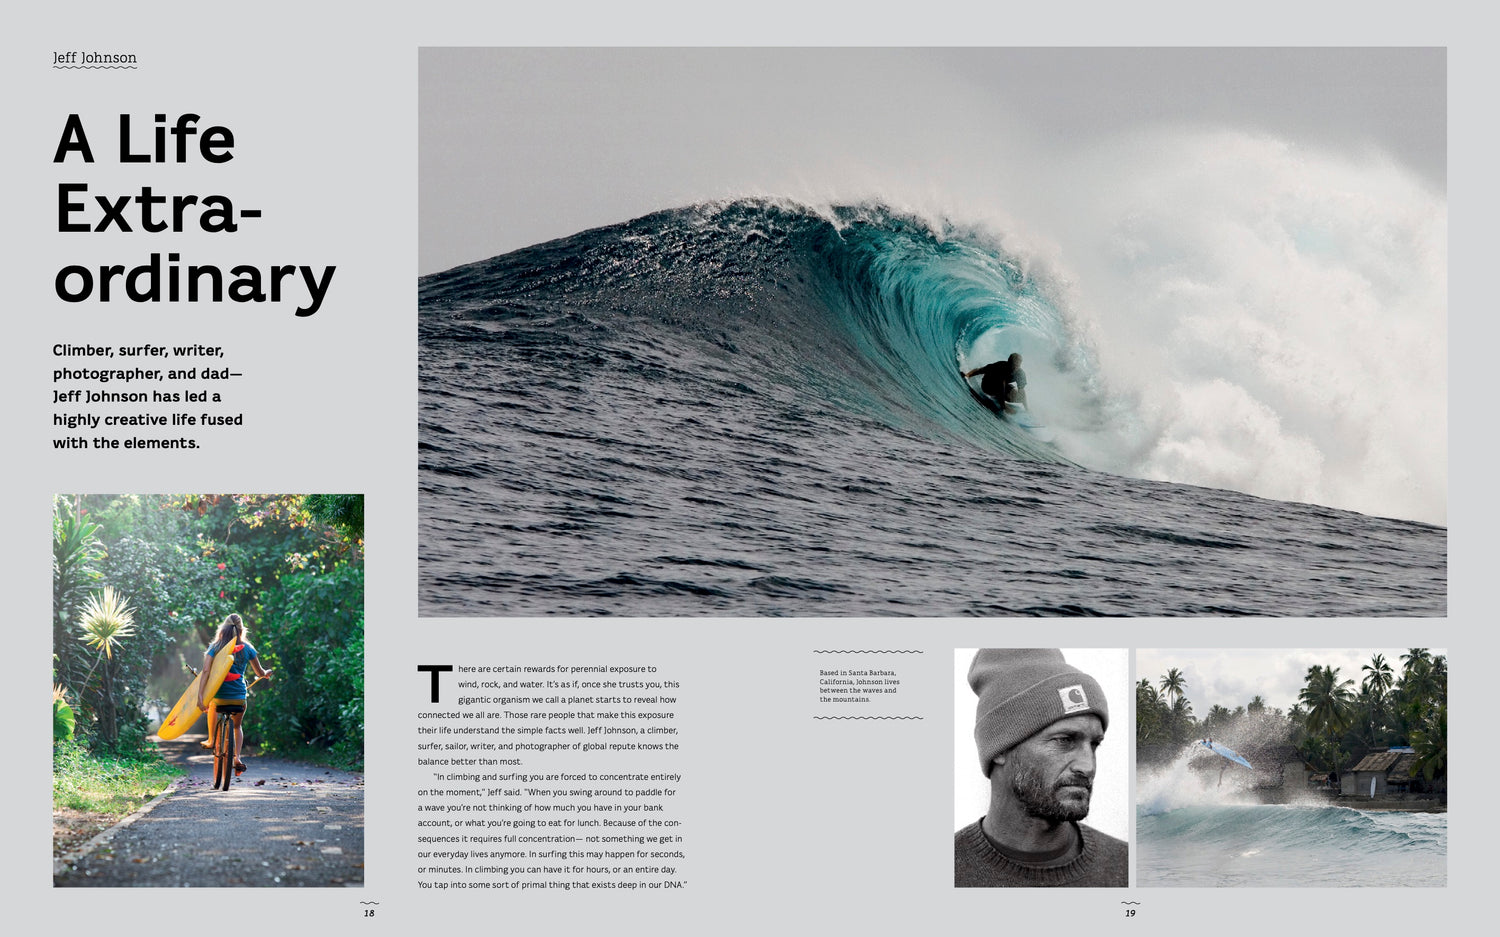 SURF ODYSSEY - the culture of wave riding - REBEL FIN CO.